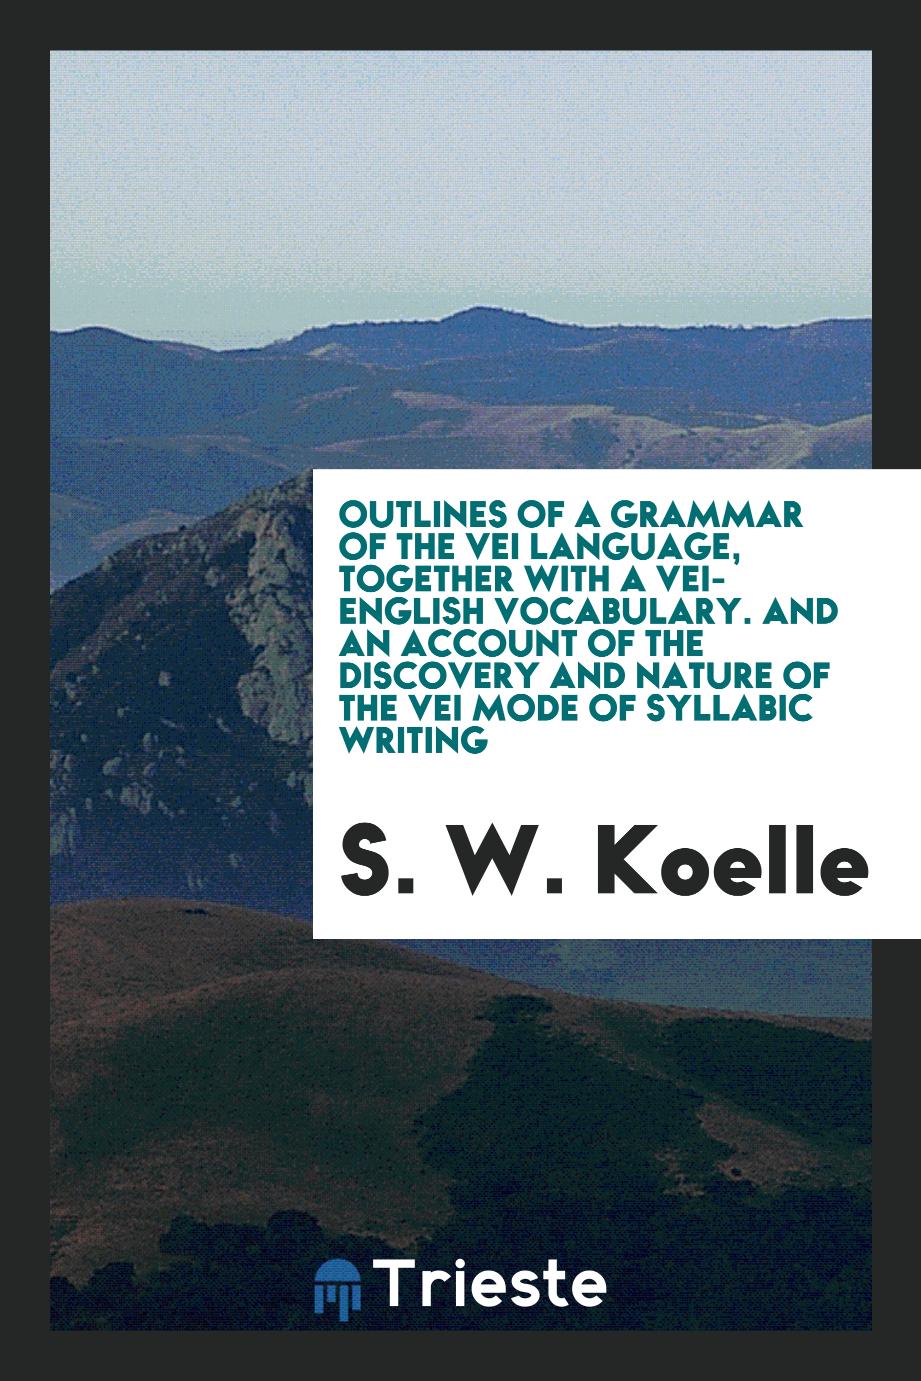 Outlines of a grammar of the Vei language, together with a Vei-English vocabulary. And an account of the discovery and nature of the Vei mode of syllabic writing